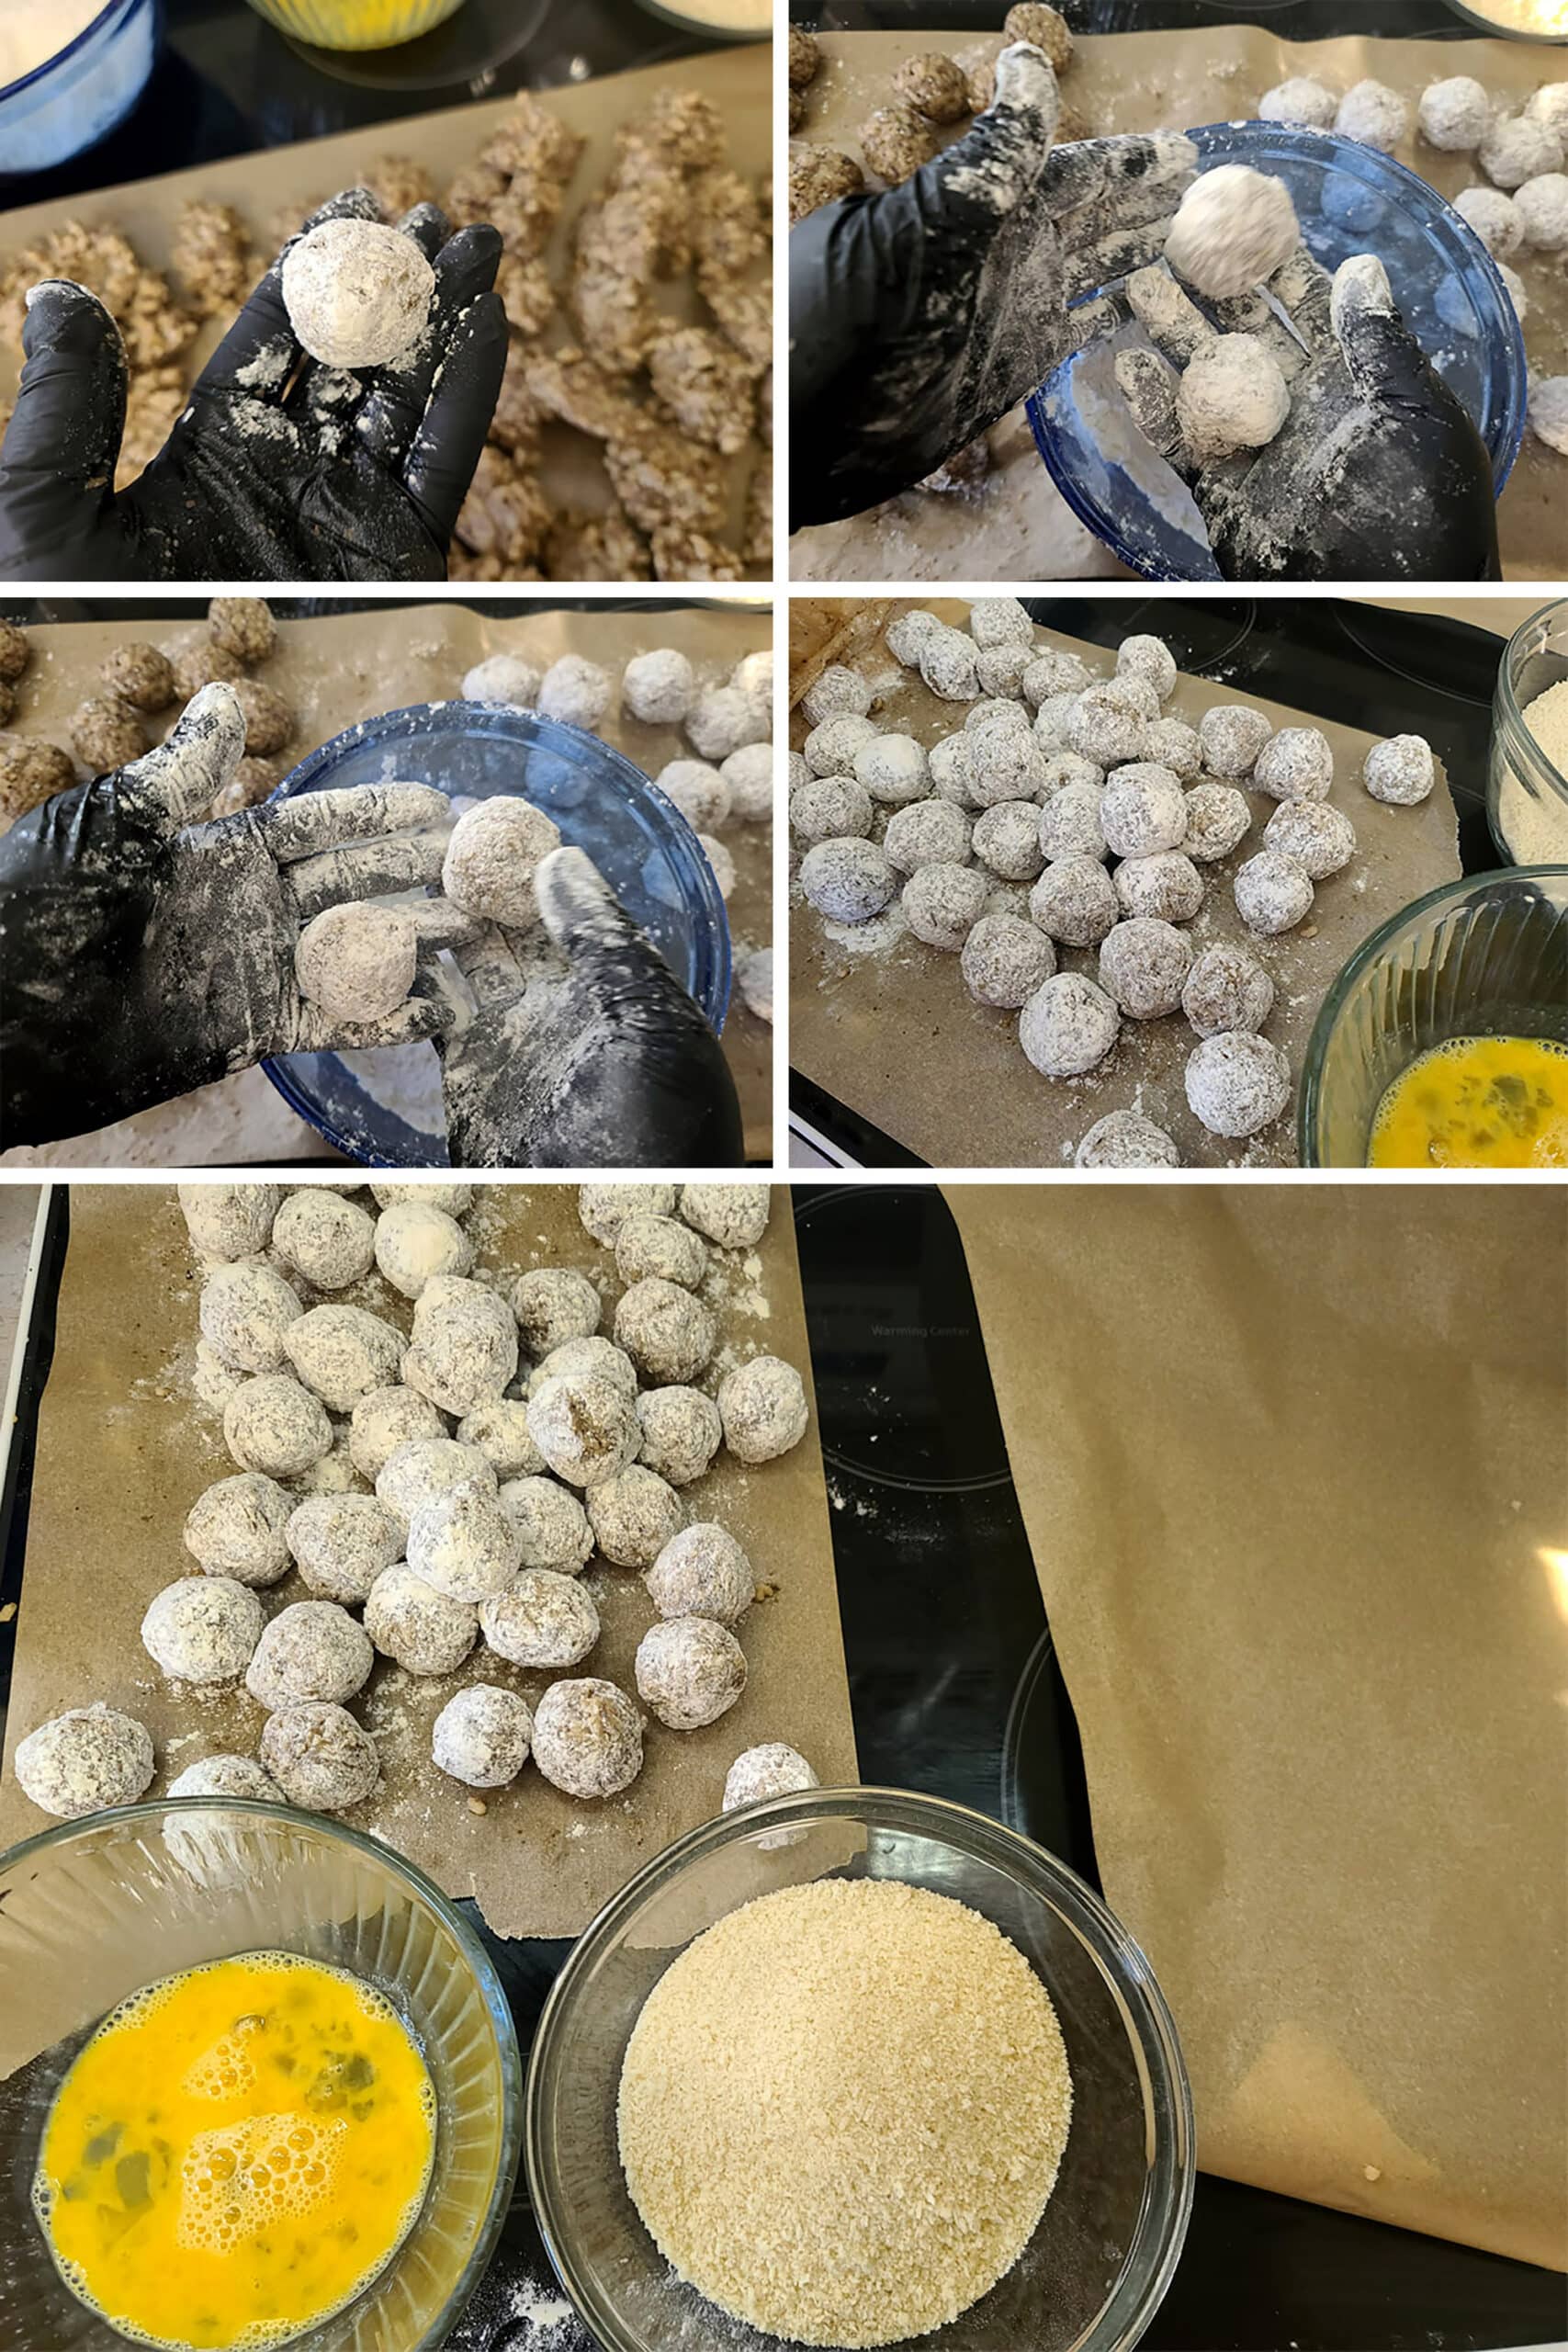 4 part image showing the rice balls being rolled in seasoned flour and arranged on a lined baking pan.